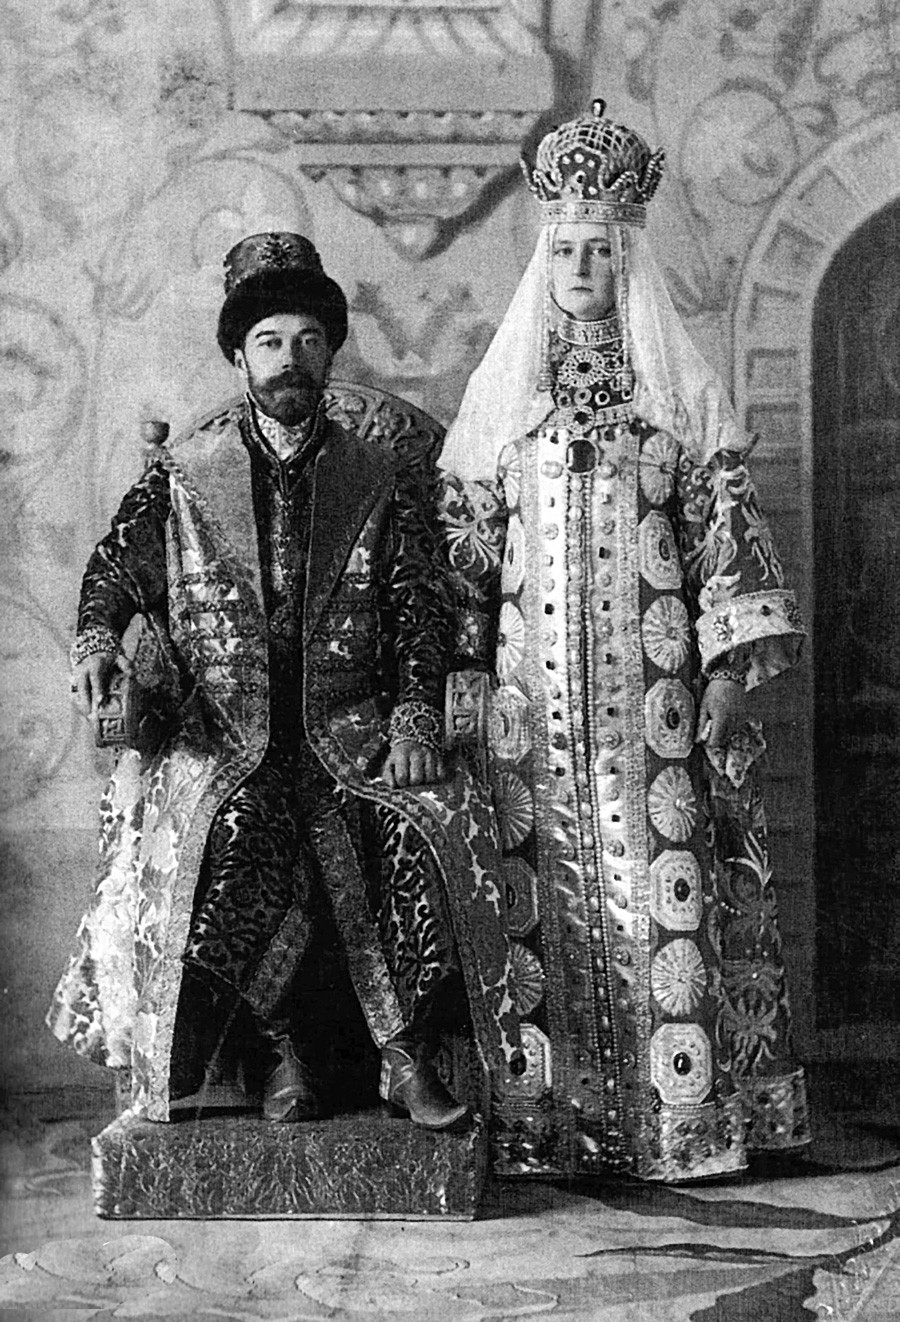 Nicholas II of Russia and Alexandra Fyodorovna (Alix of Hesse) in Russian dresses. 1913, celebration of 300th anniversary of the Romanov dynasty.